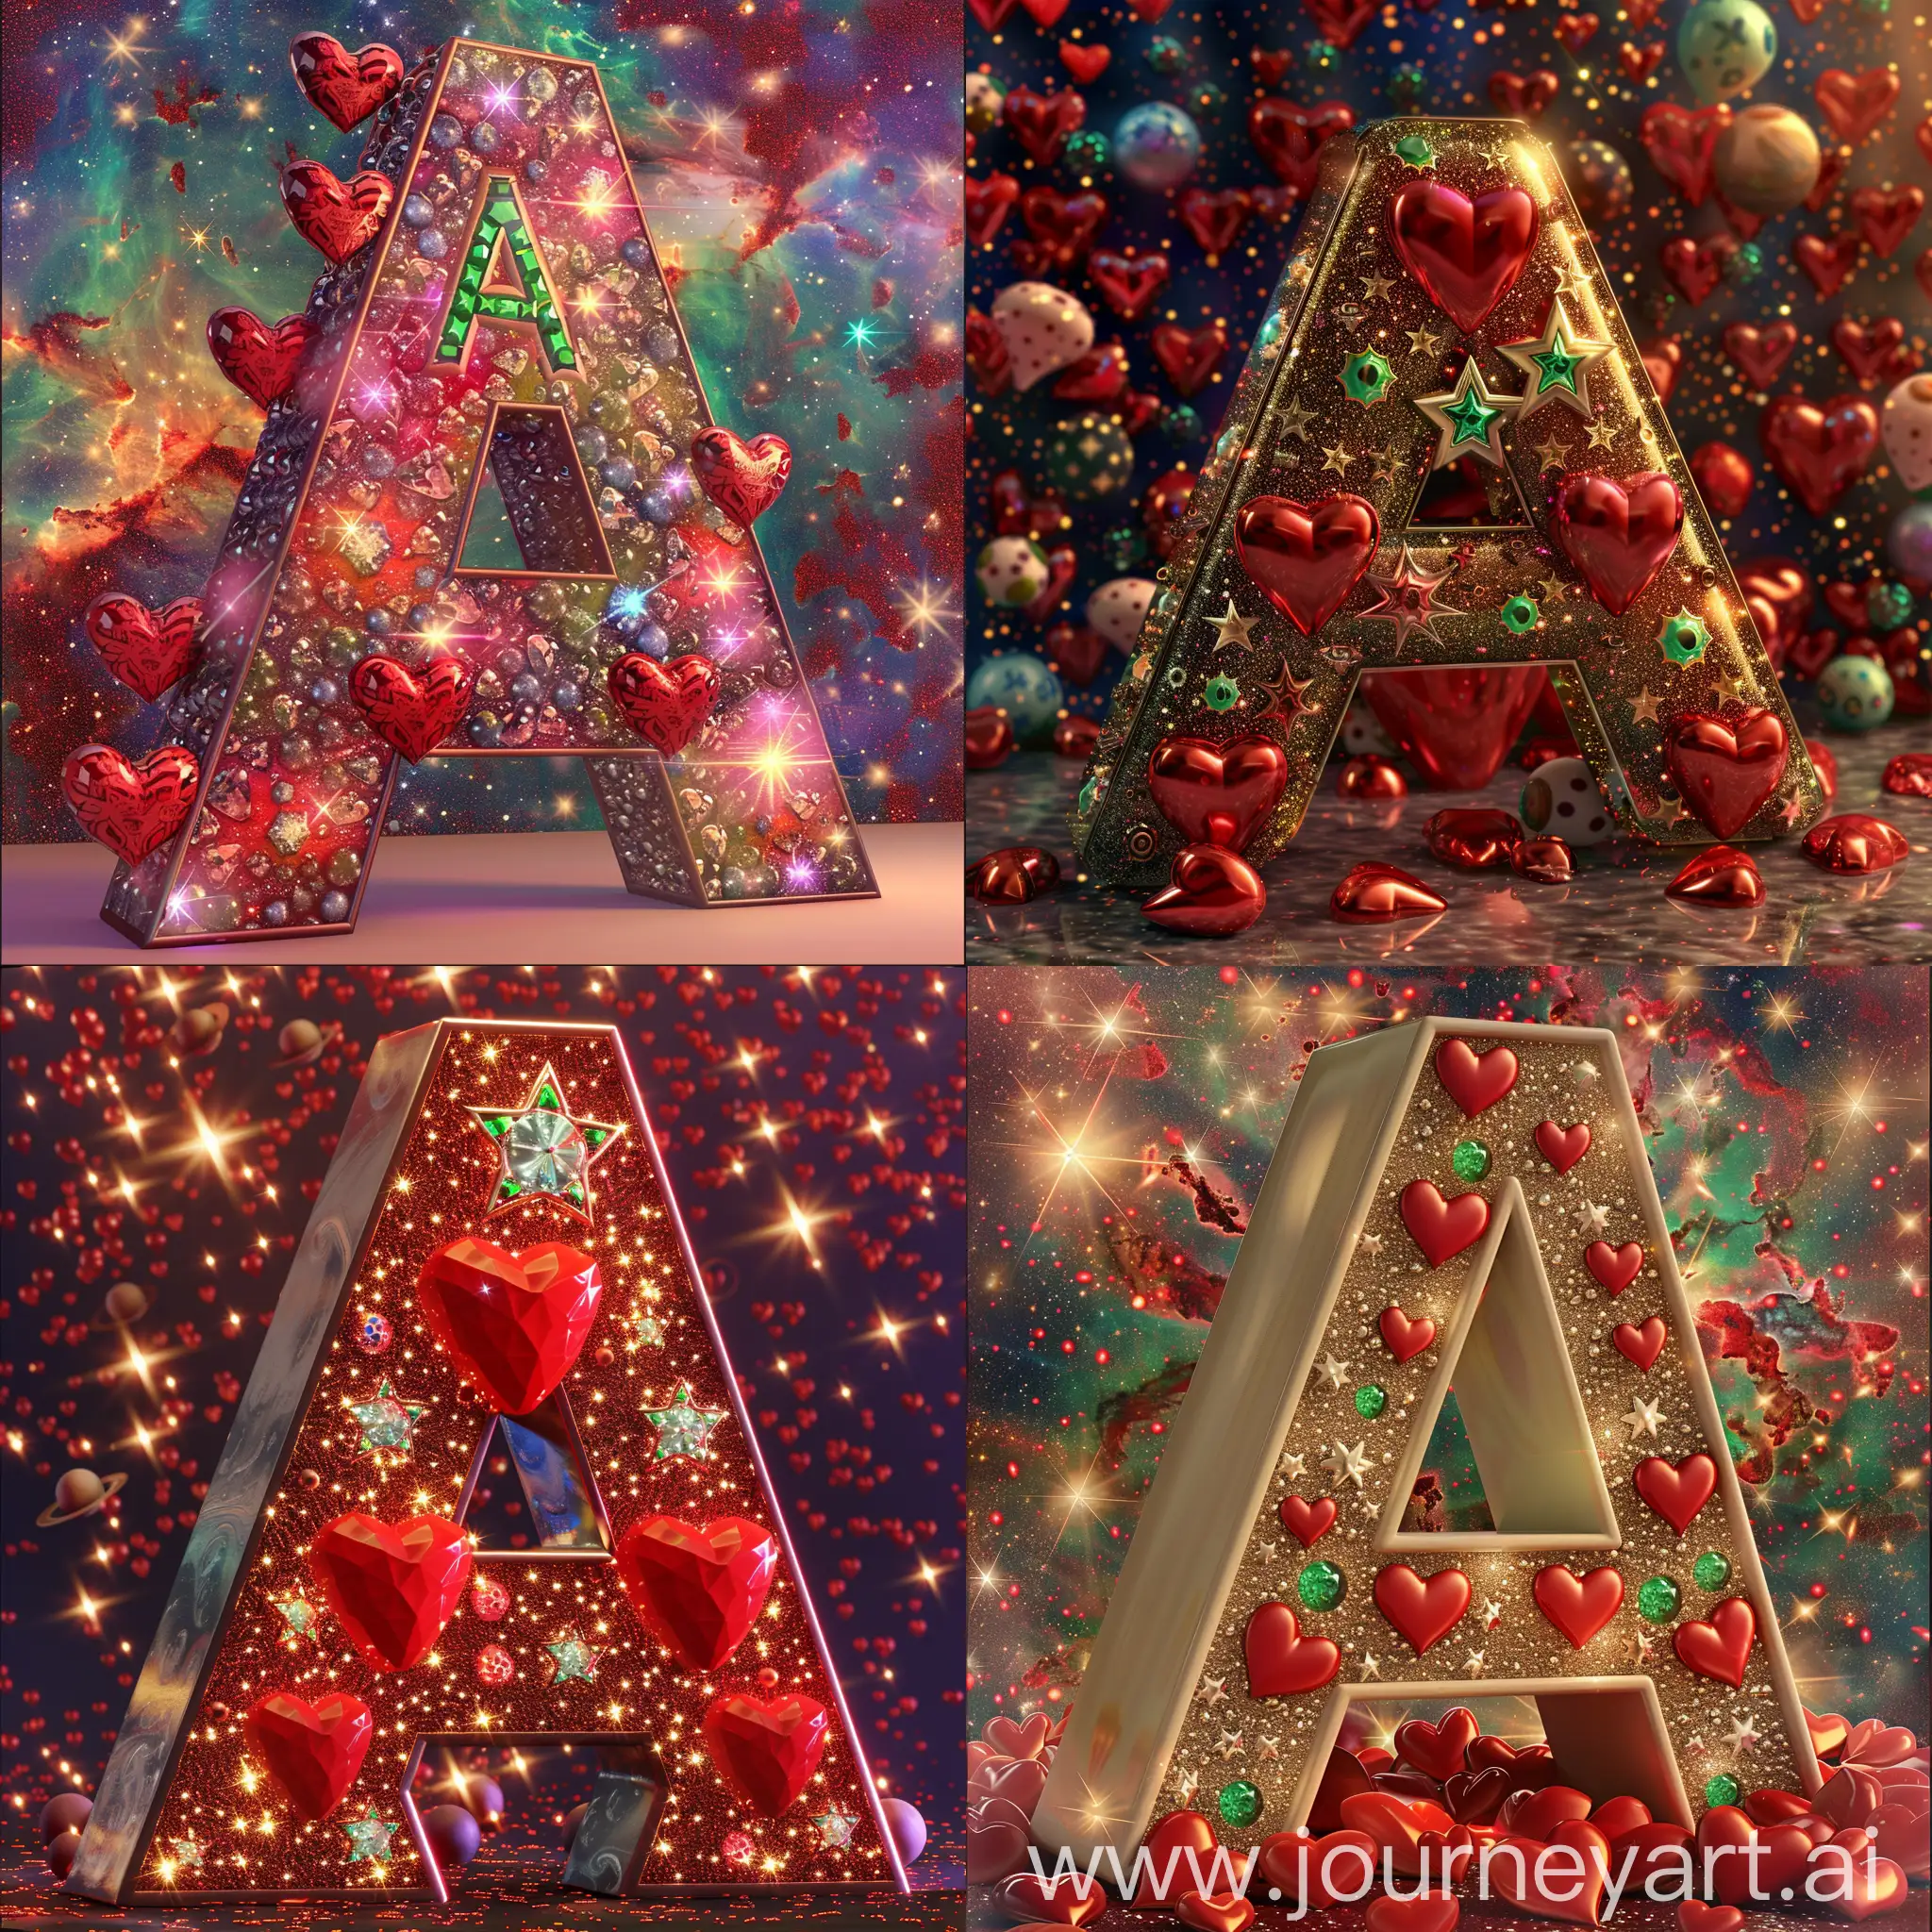 3D-Letter-A-with-Stars-Constellations-and-Galaxy-Elements-Surrounded-by-Red-Hearts-with-Emeralds-and-Diamonds